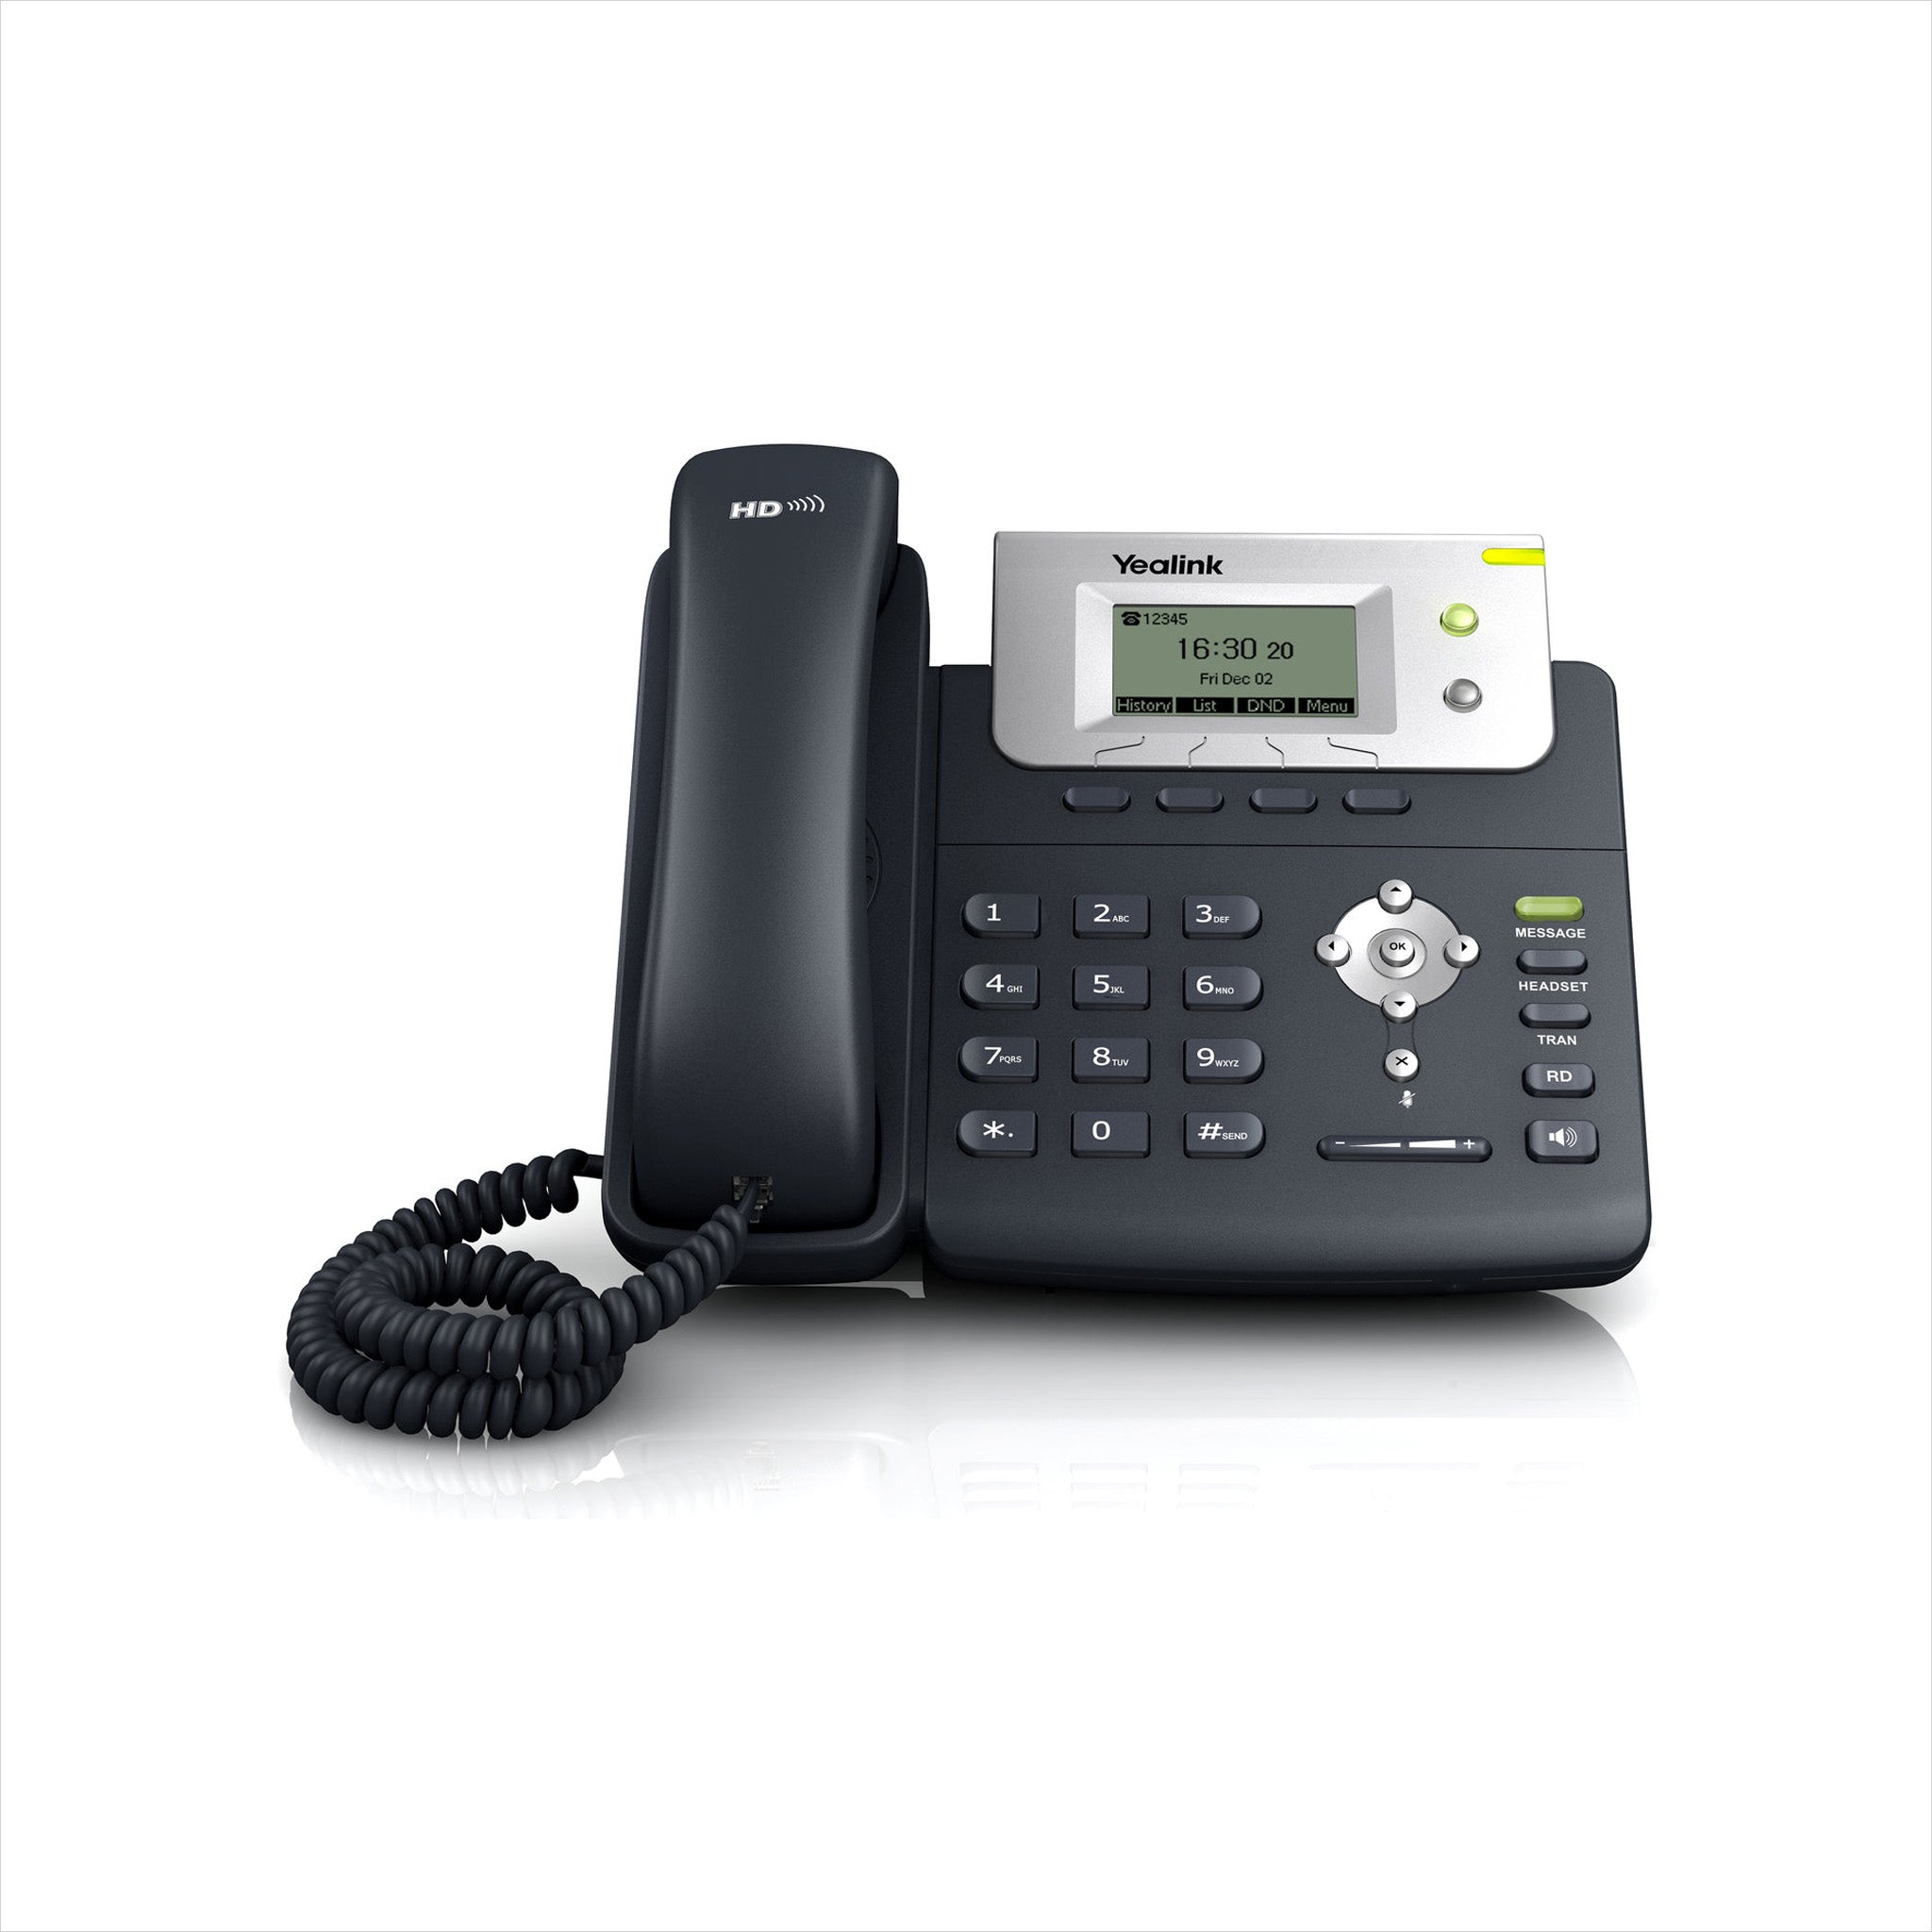 IP Phones, SIP/VoIP Phones, and Conference Phone Providers – Yealink